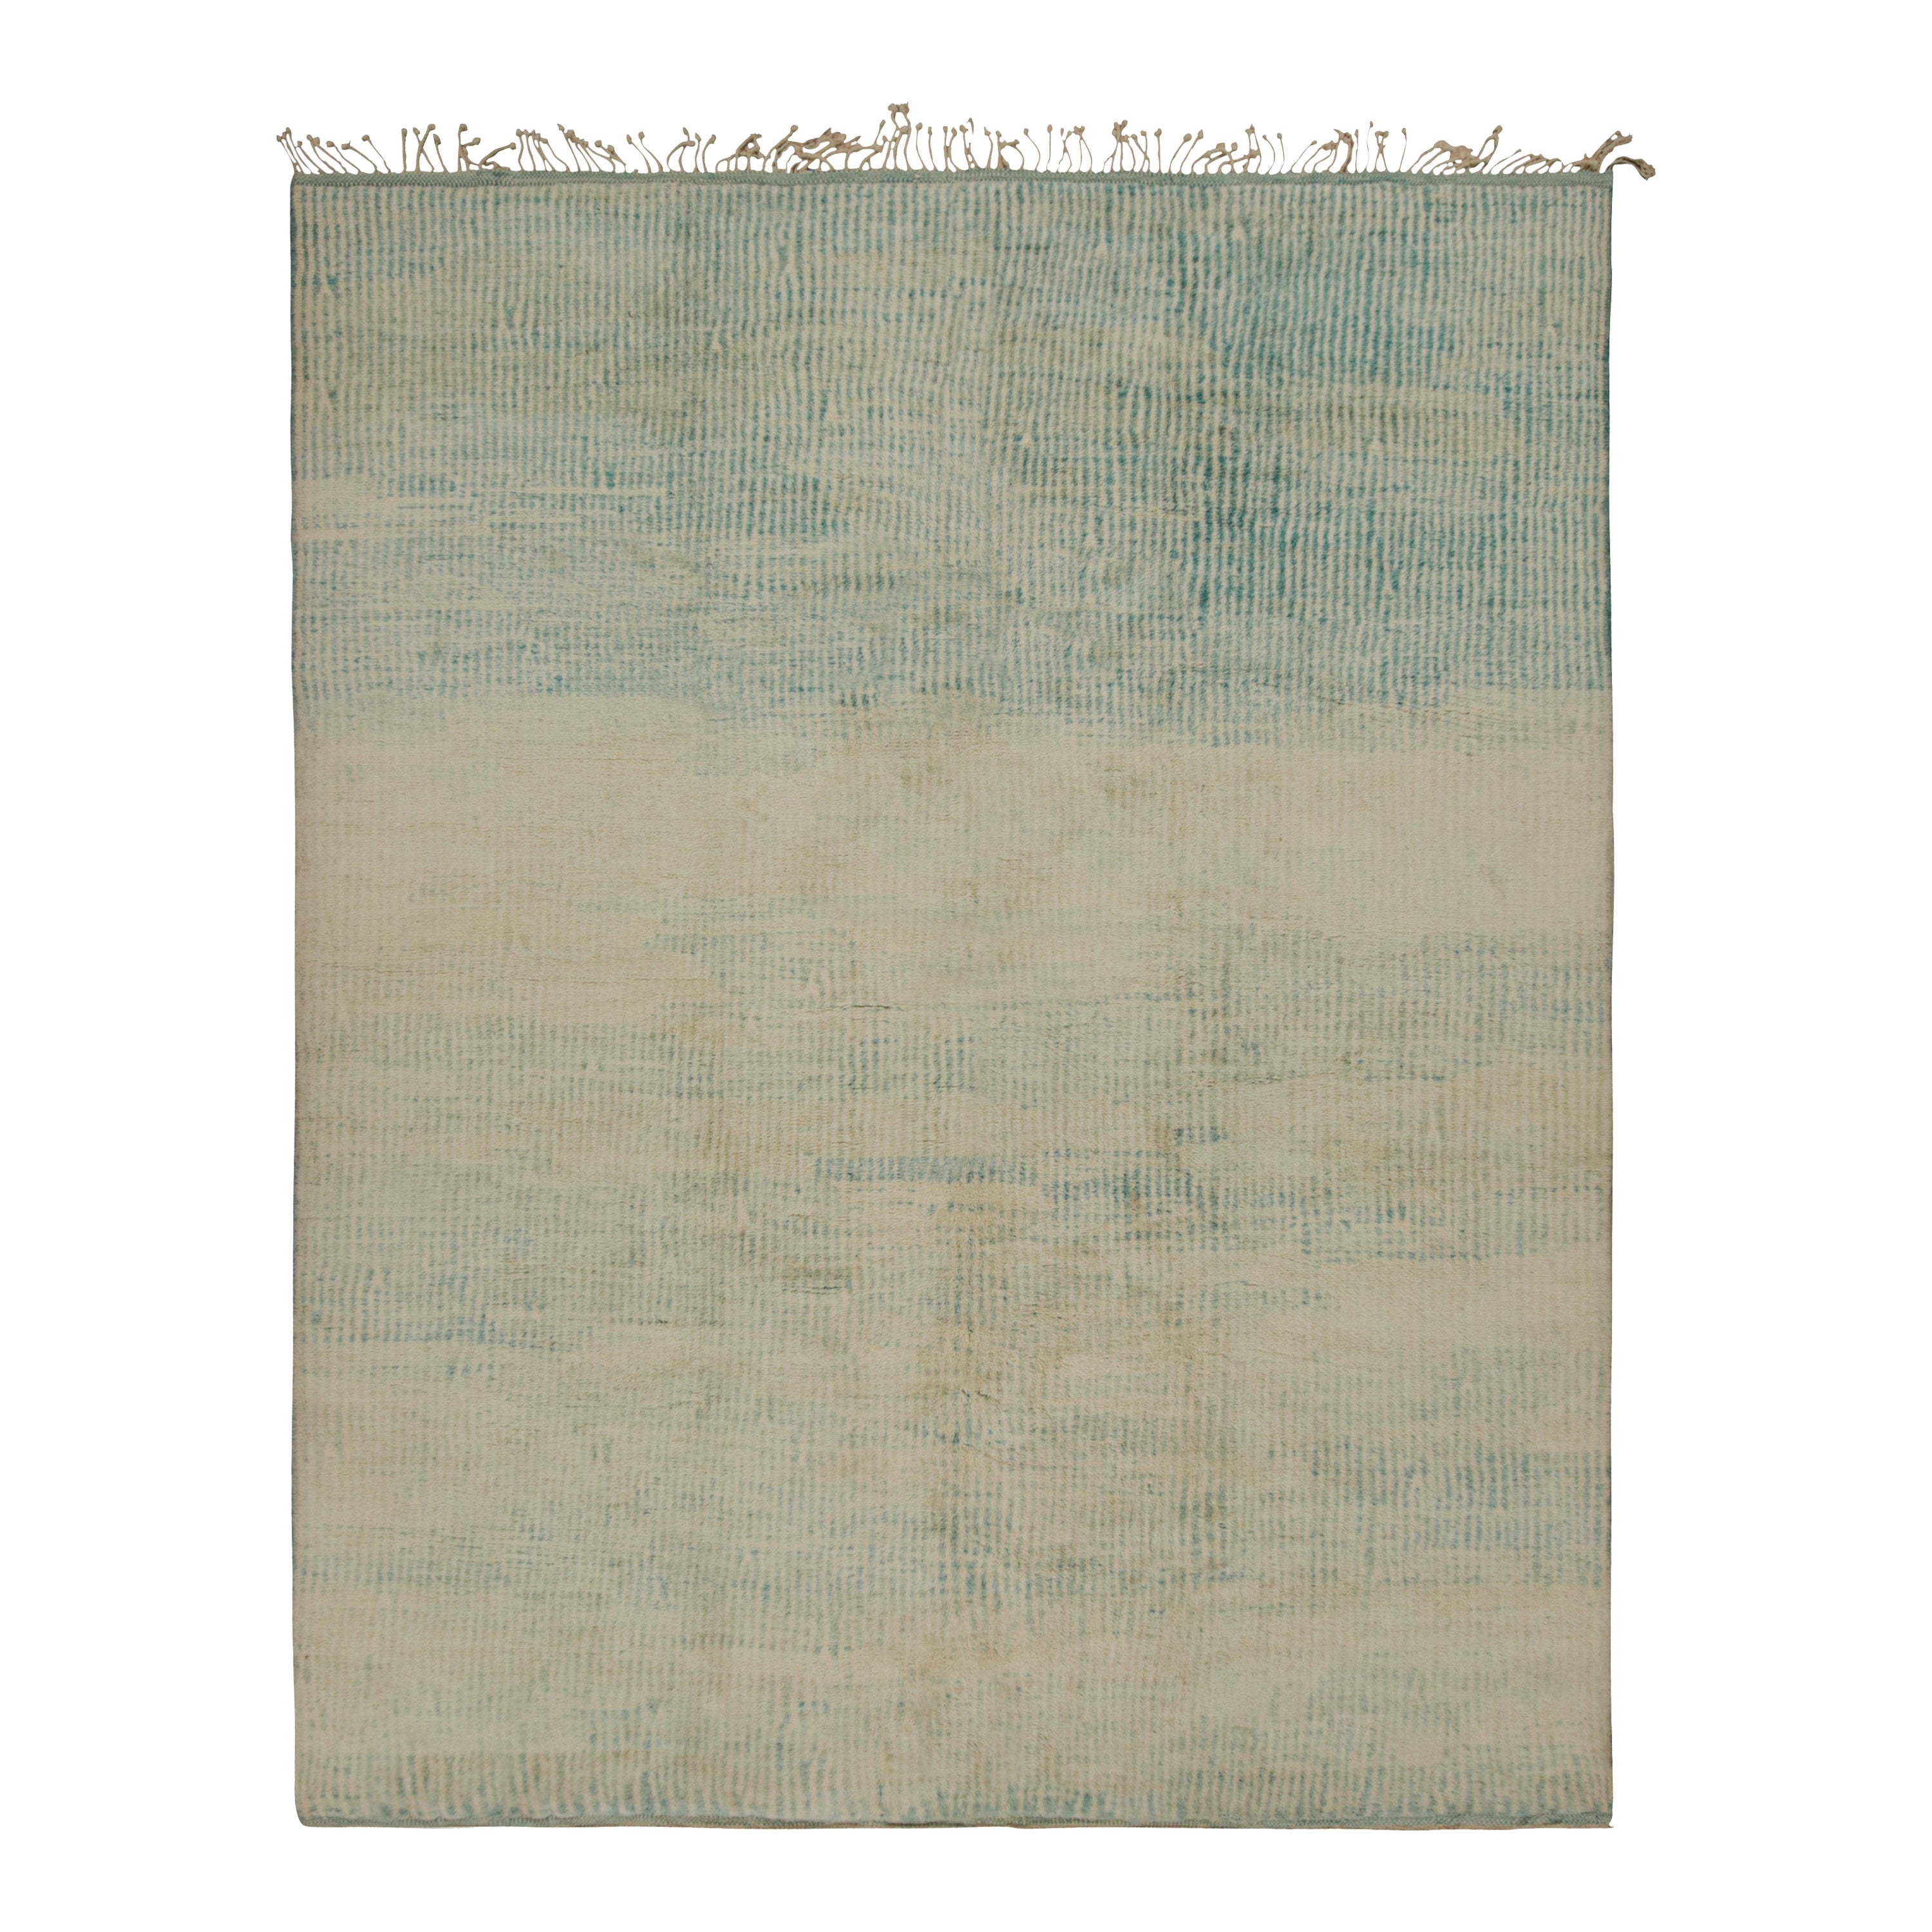 Rug & Kilim’s Moroccan Rug with Beige and Light Blue Stripes in Lush Pile